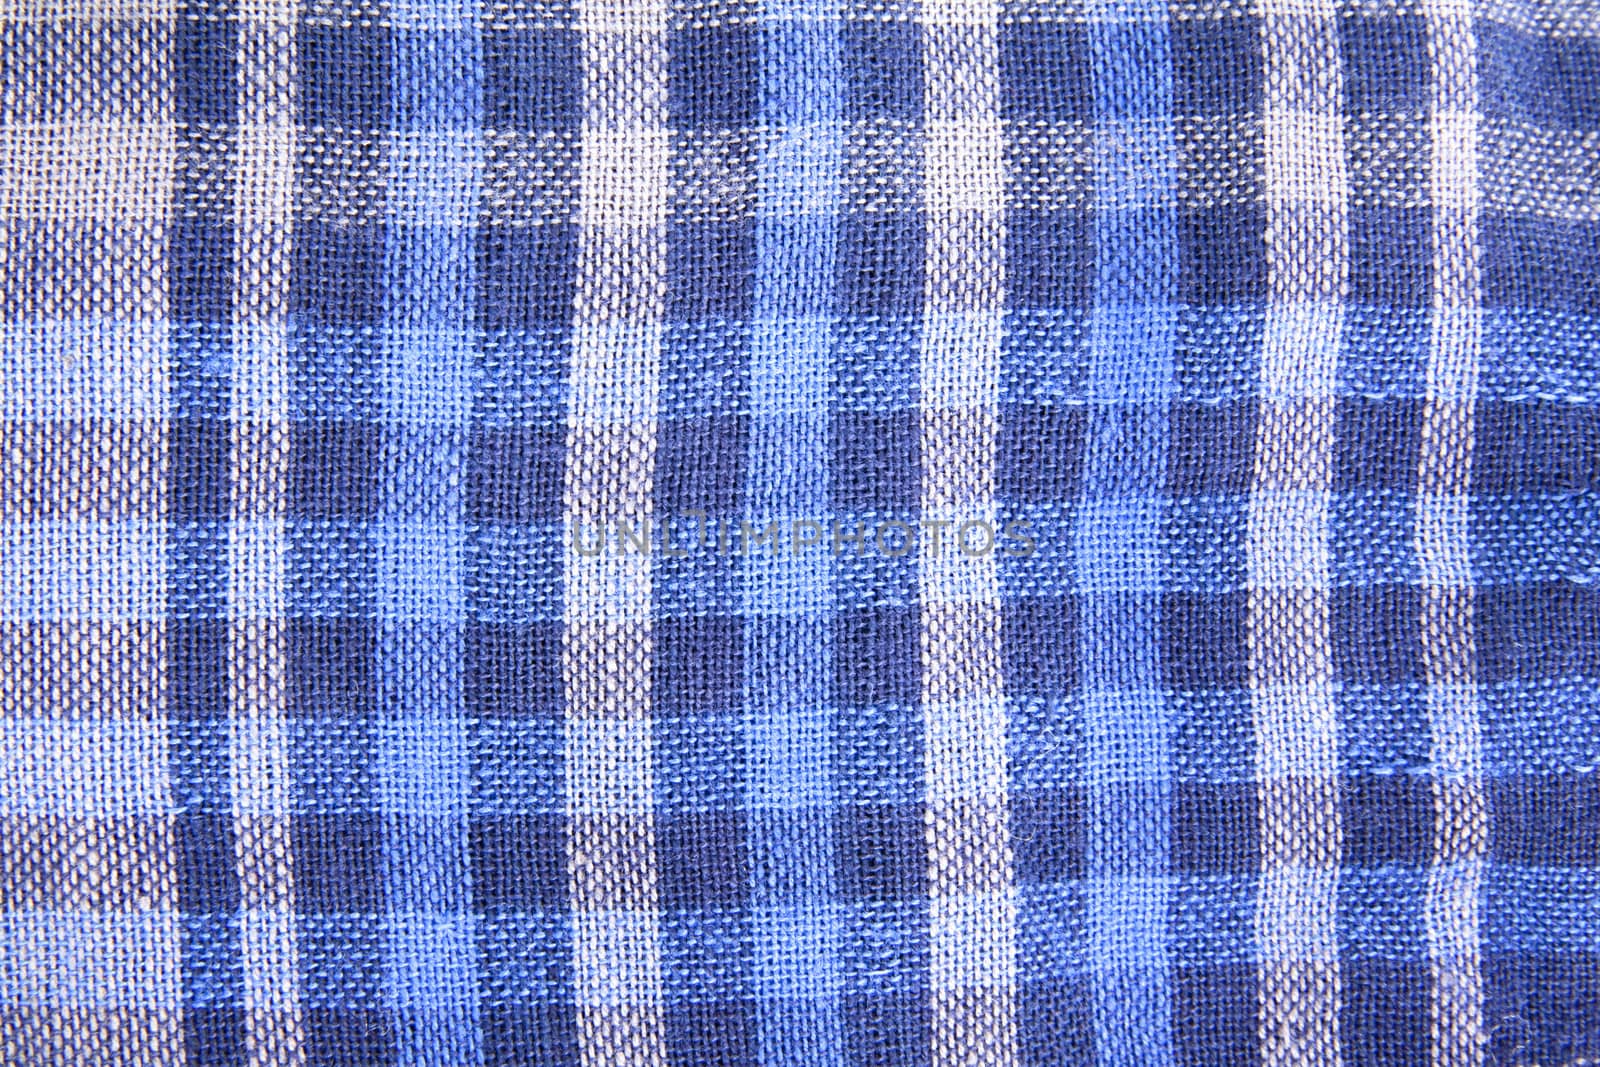 Square pattern on cloth